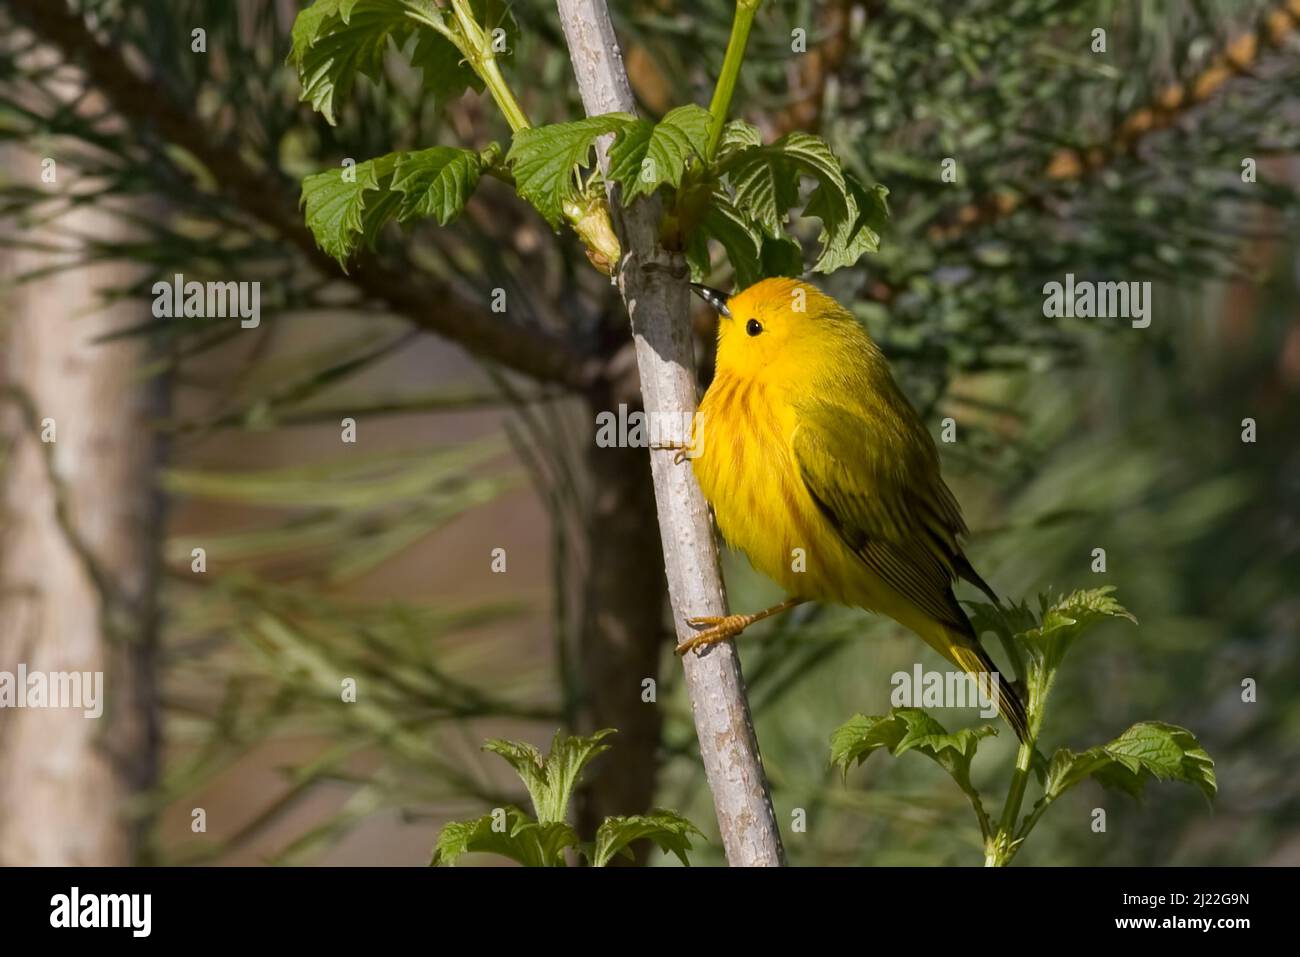 A Yellow Warbler, Setophaga petechia, perched on a small branch Stock Photo